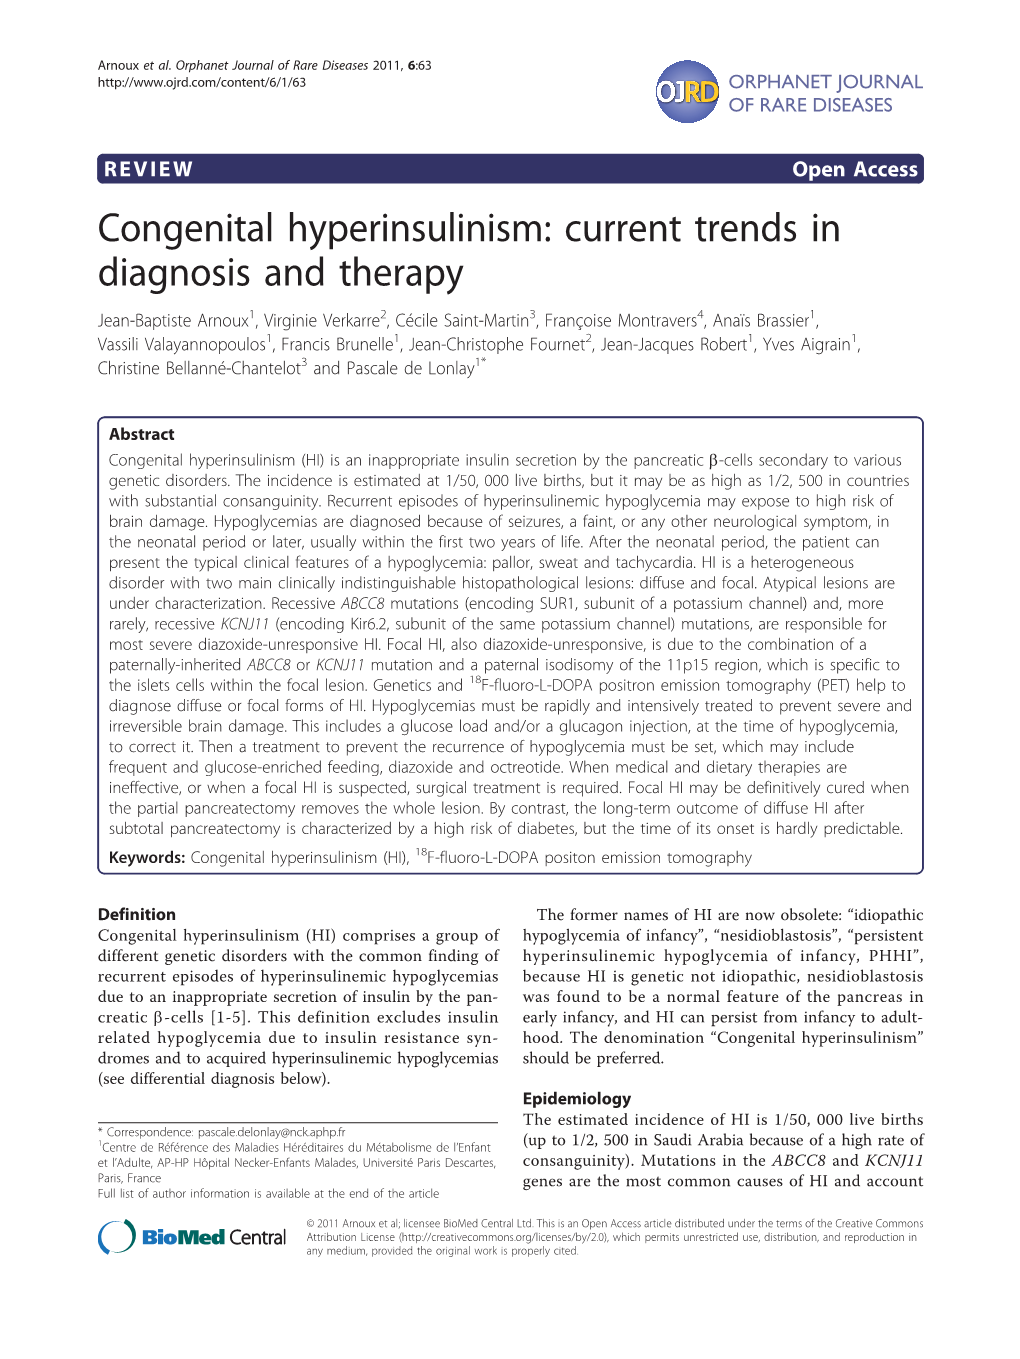 Congenital Hyperinsulinism: Current Trends in Diagnosis and Therapy